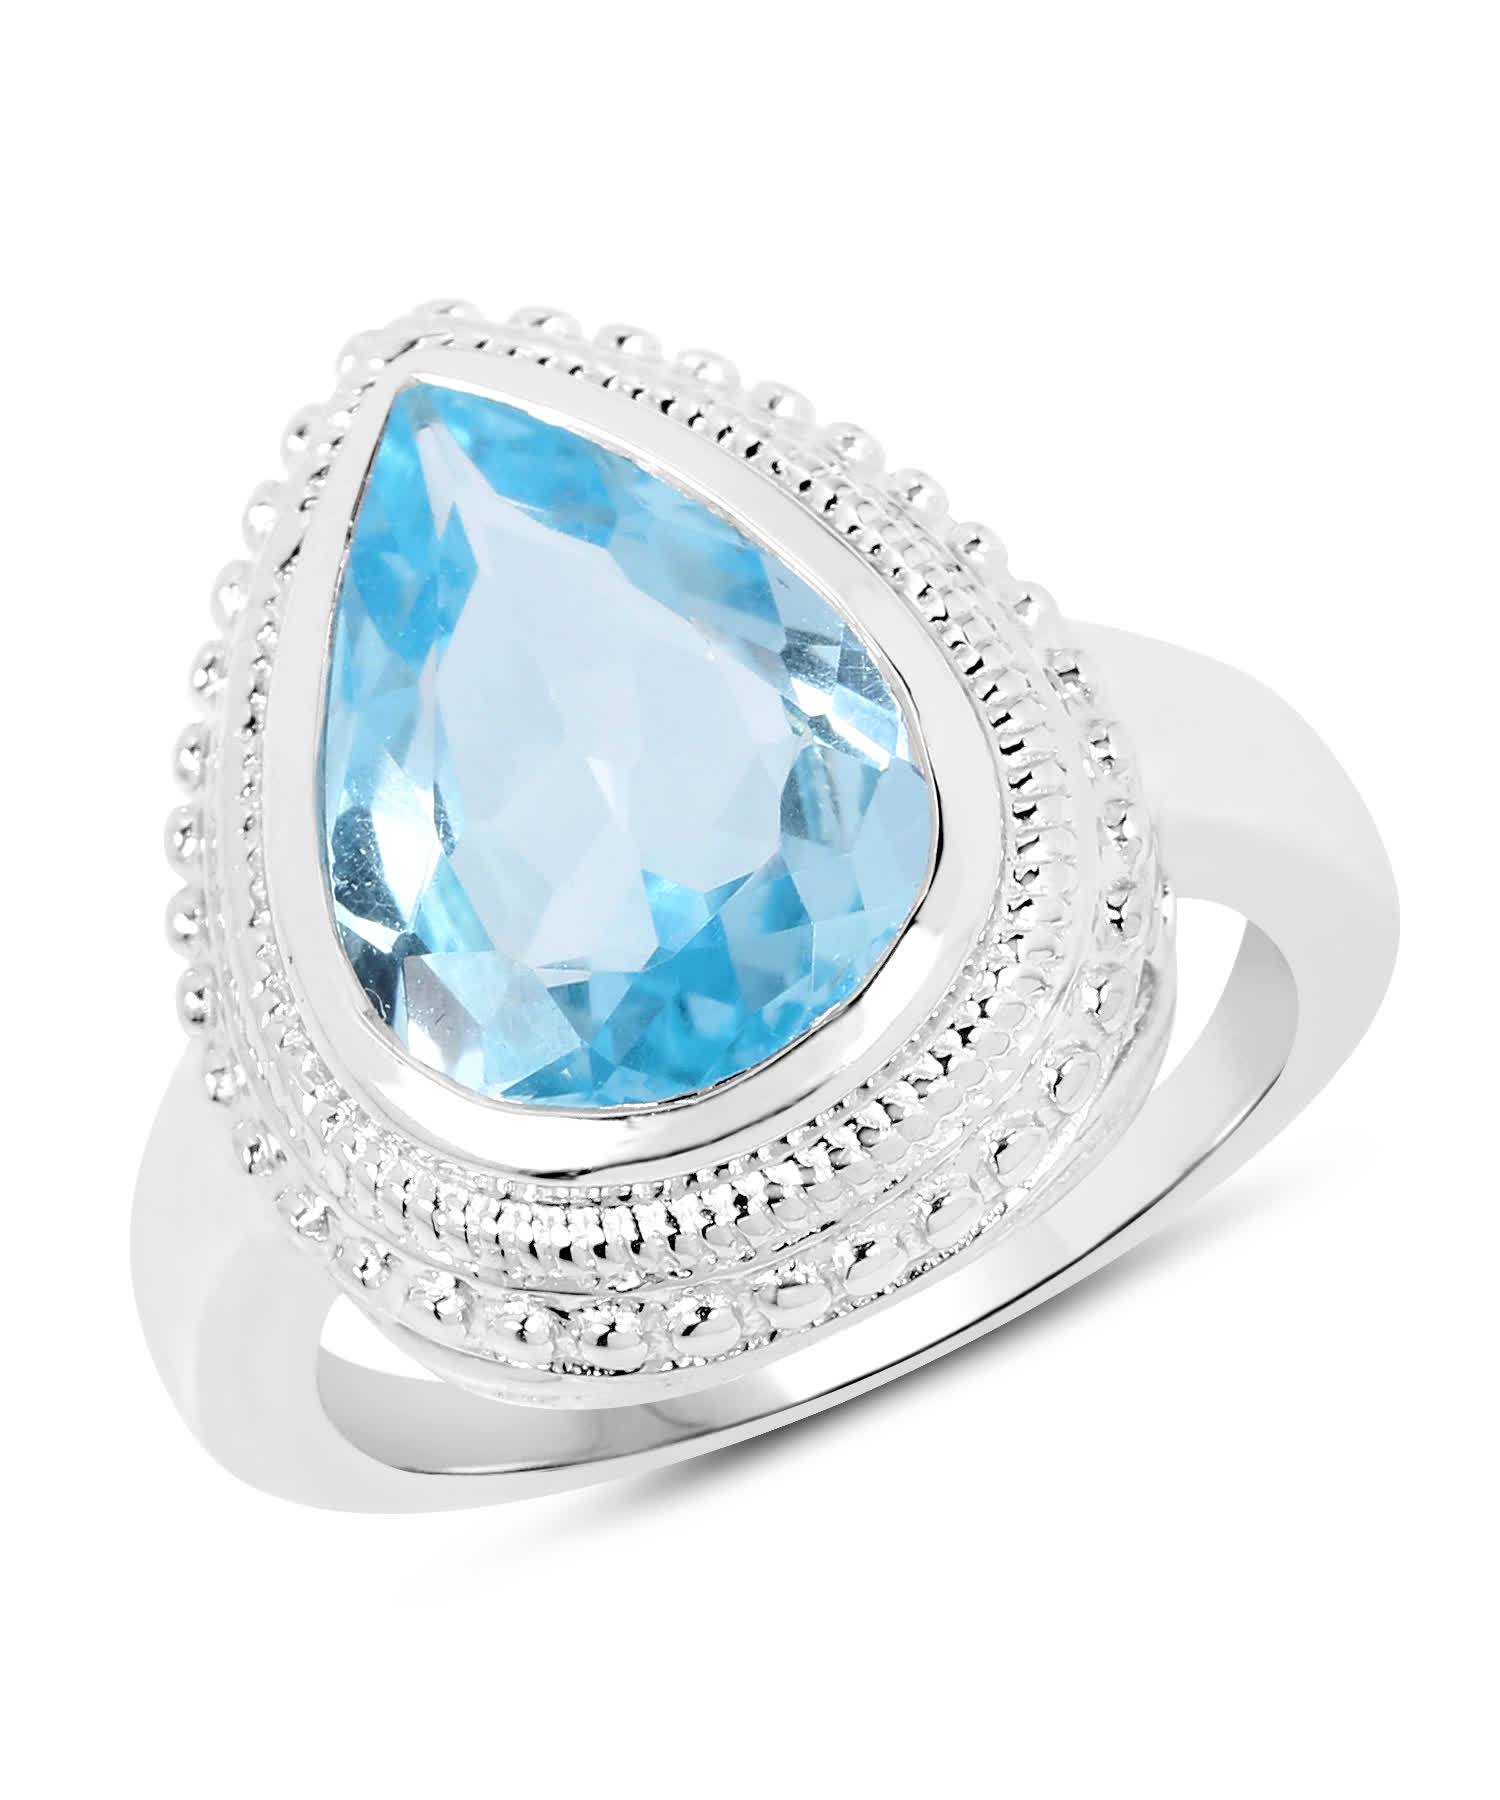 5.30ctw Natural Sky Blue Topaz Rhodium Plated 925 Sterling Silver Cocktail Ring View 1